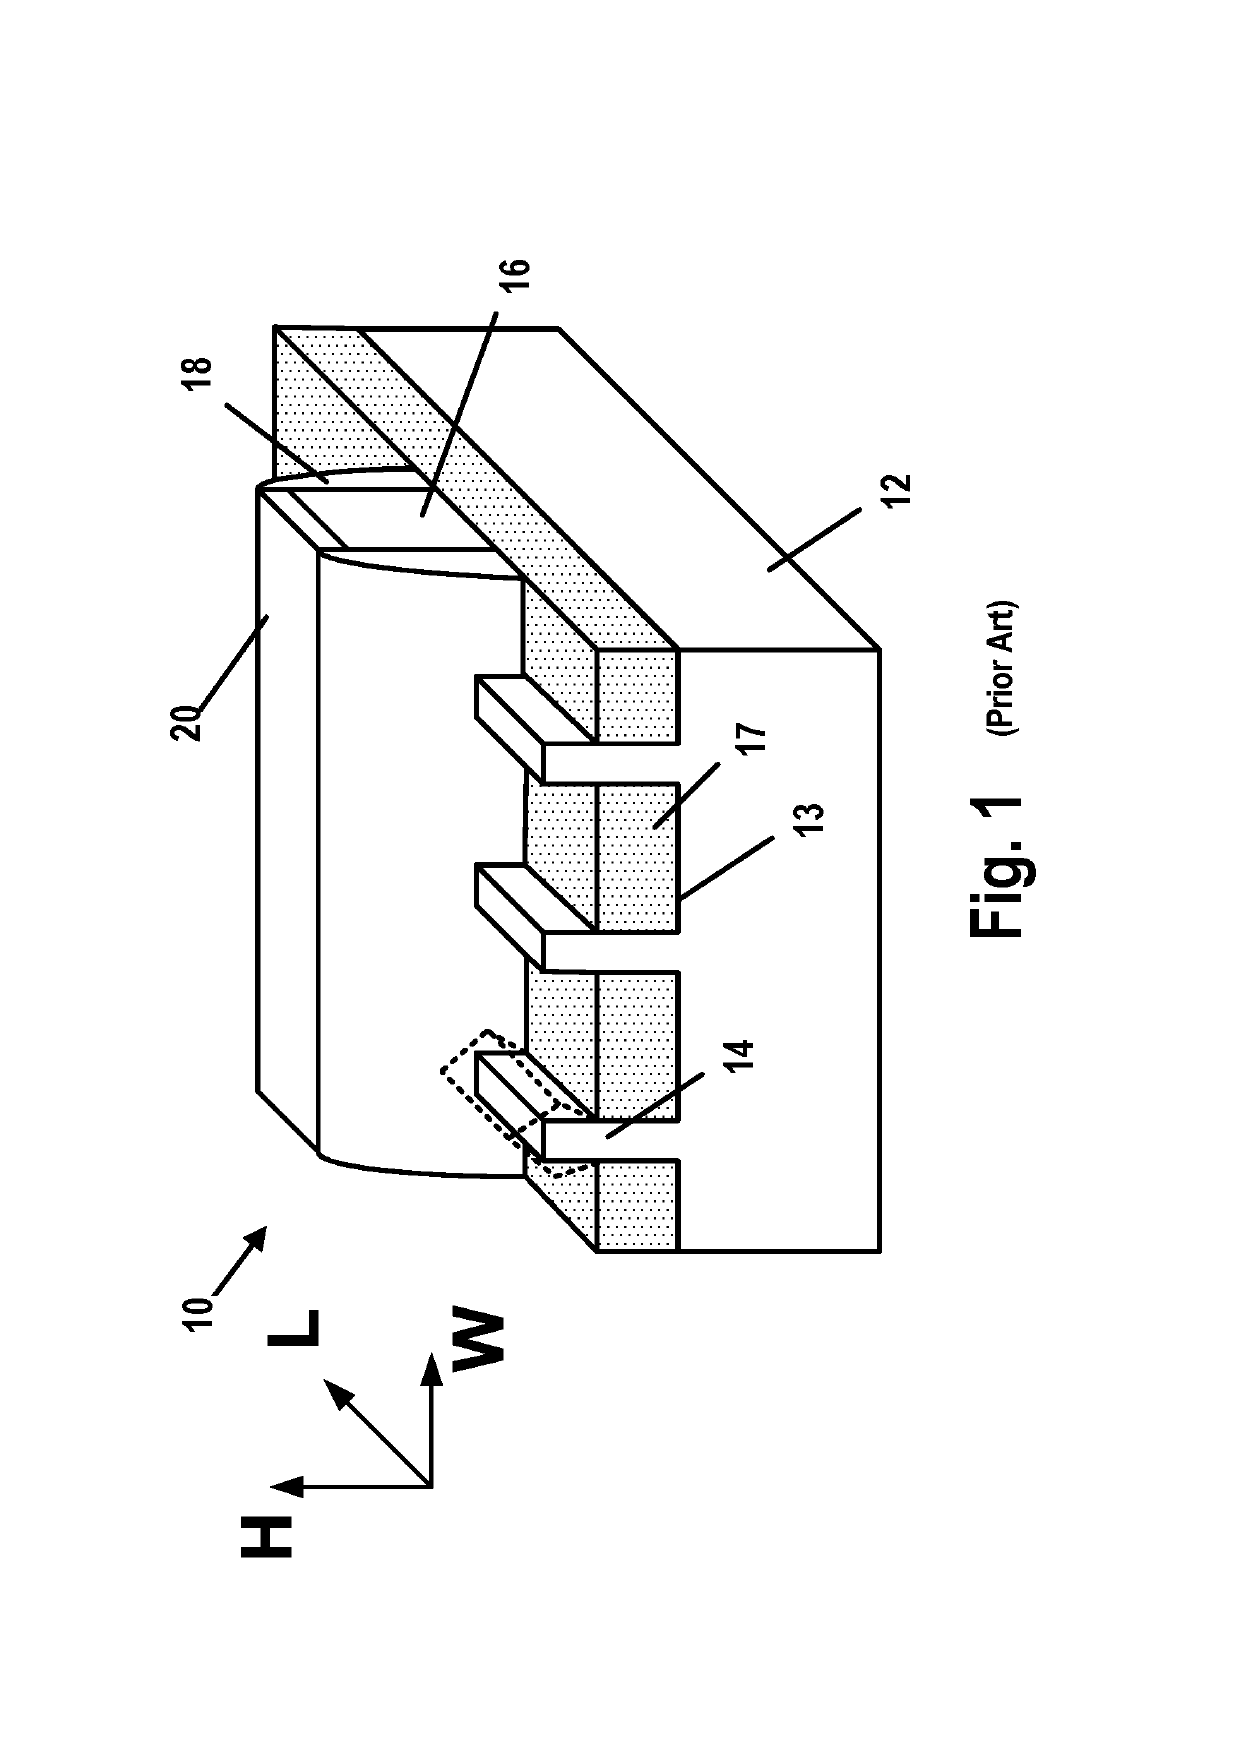 Methods of forming source/drain contact structures on integrated circuit products